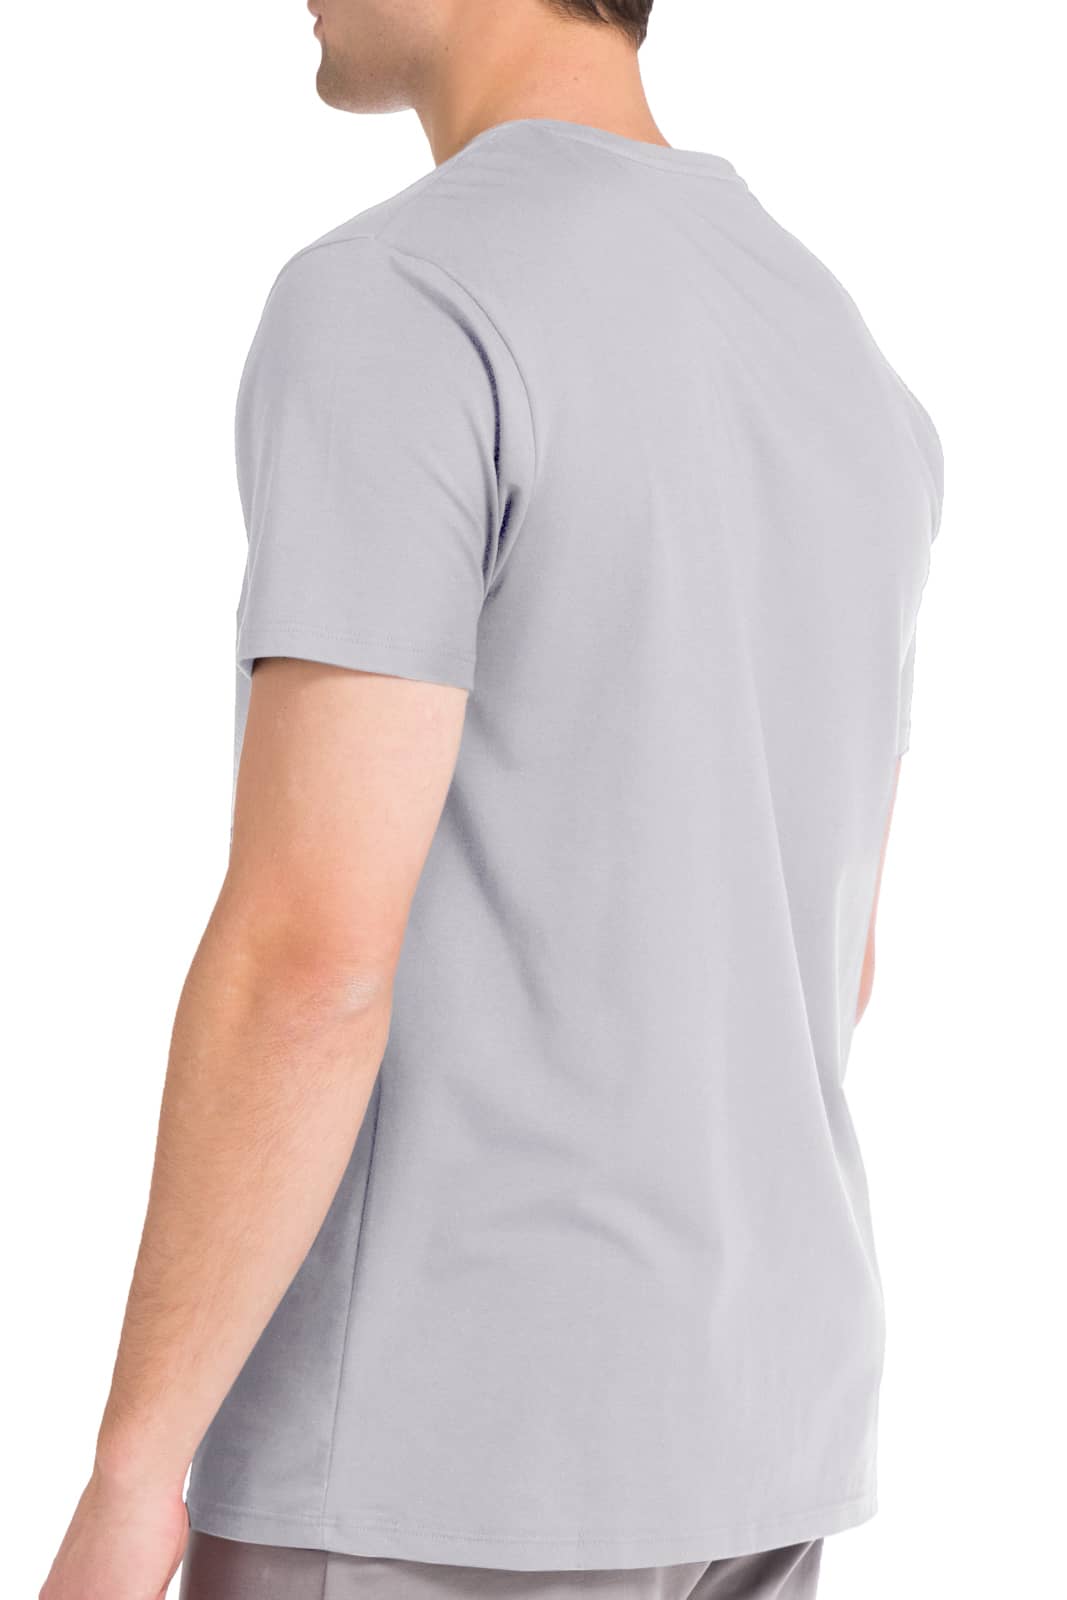 Men's Classic Fit Soft Stretch Crew Neck Undershirt Mens>Casual>Tops Fishers Finery 